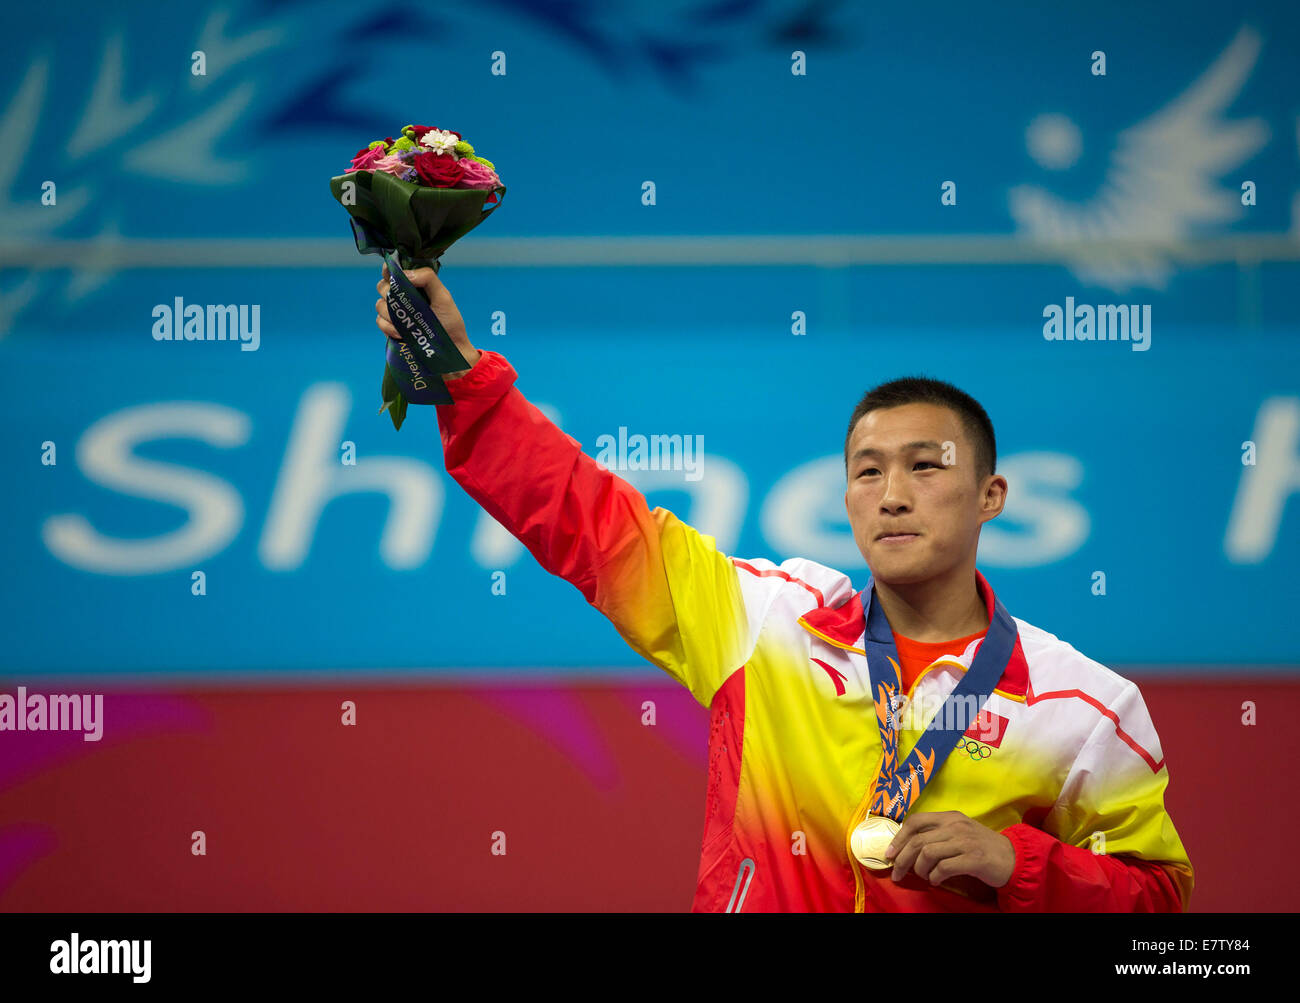 Incheon, South Korea. 24th Sep, 2014.Zhang Fuxiang of China poses on the podium during the awarding ceremony of men's sanda -56kg match of Wushu event at the 17th Asian Games in Incheon, South Korea, Sept. 24, 2014. Zhang Fuxiang defeated Bui Truong Giang of Vietnam and claimed the title. (Xinhua/Fei Maohua)(lz) Stock Photo